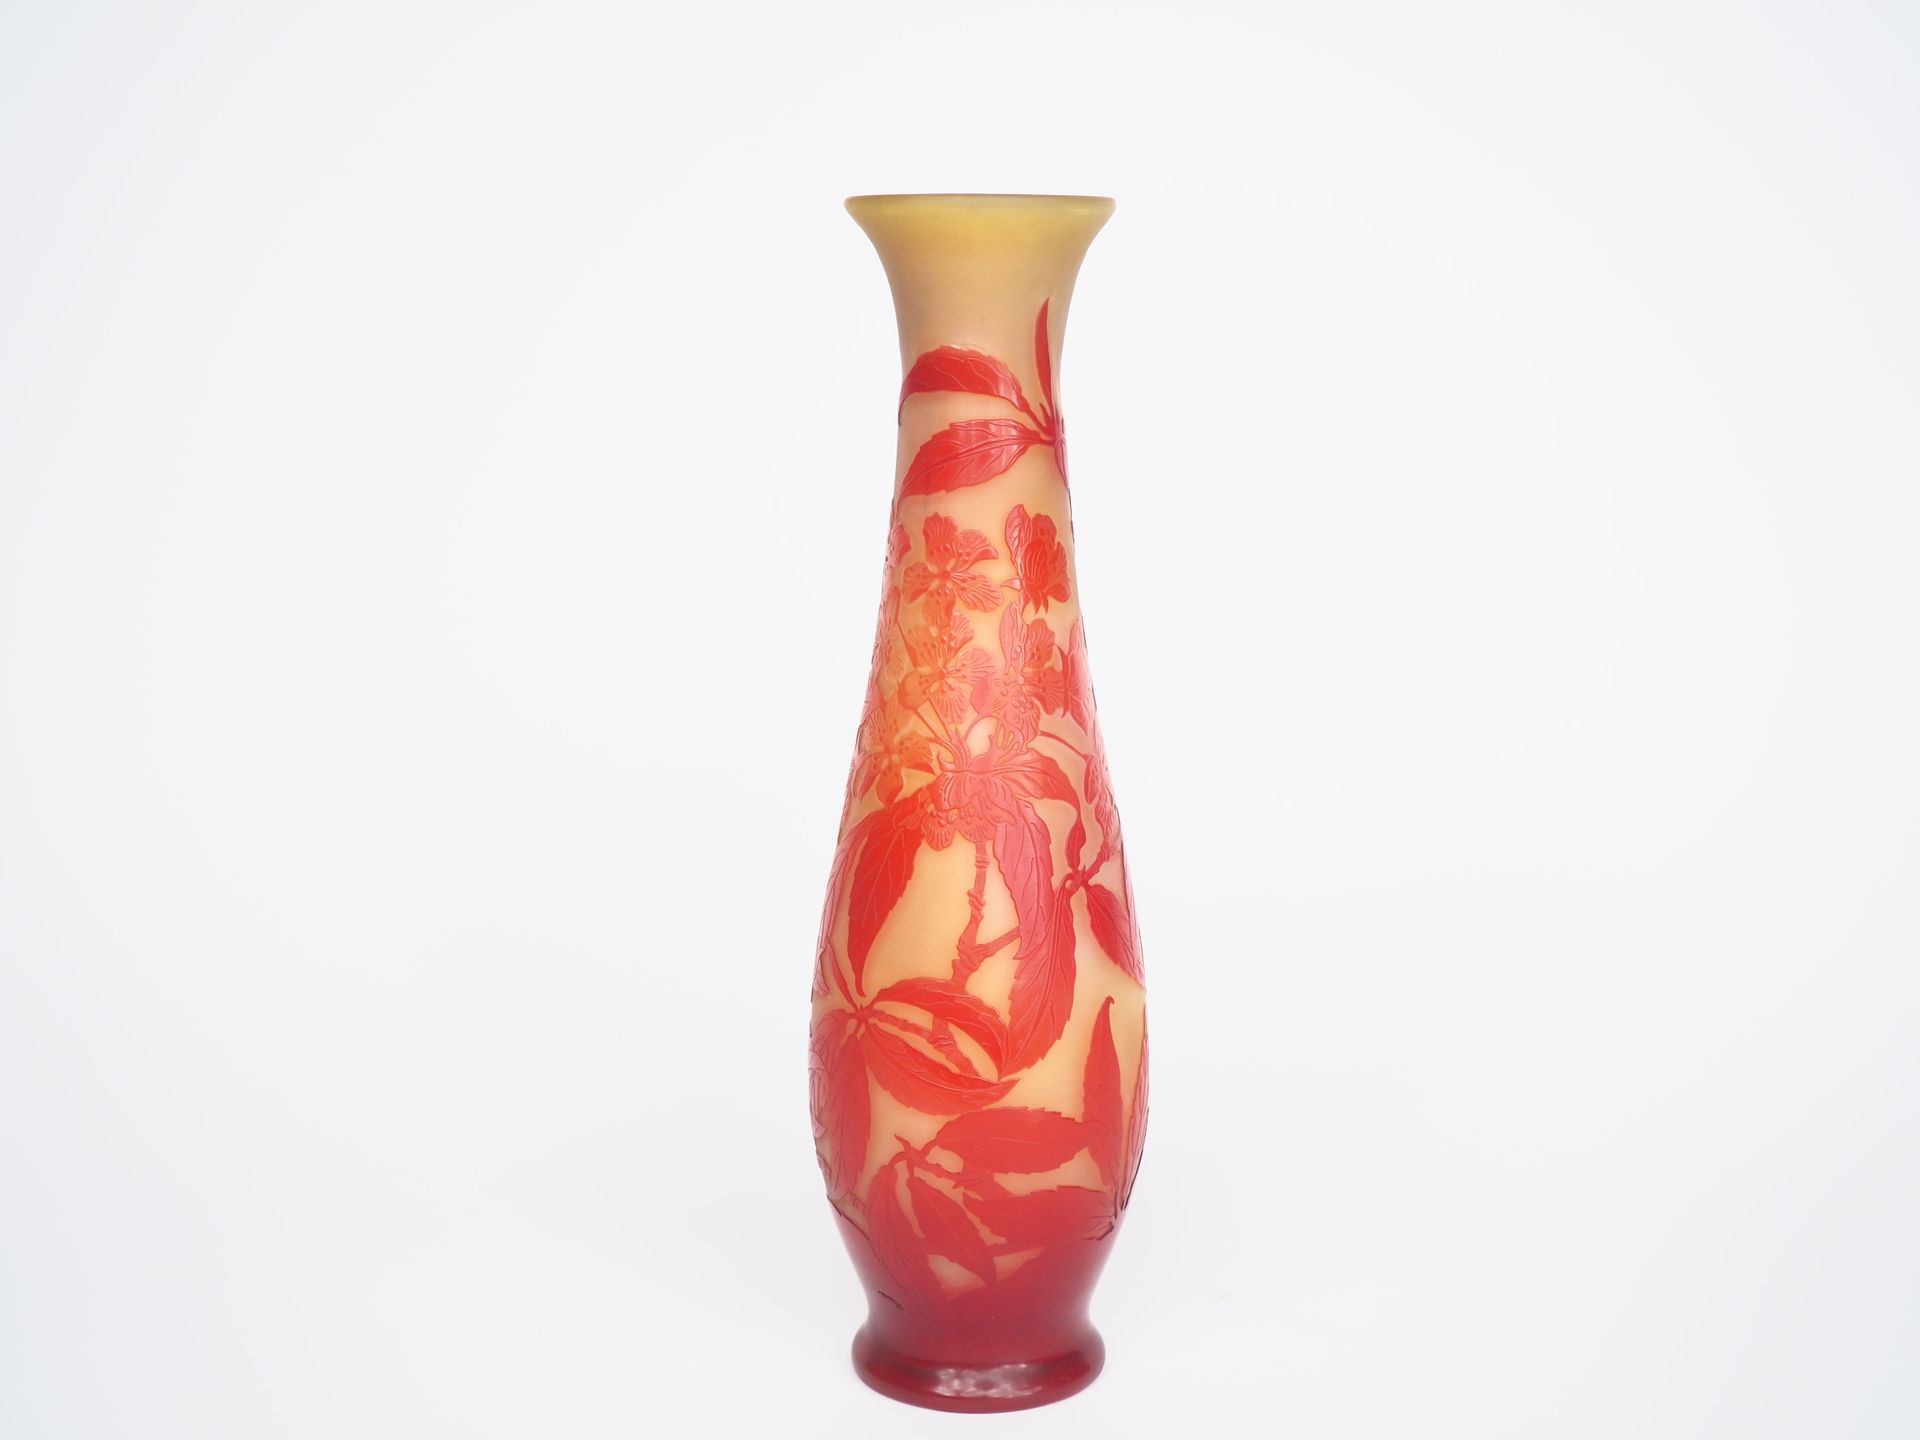 Null GALLE.
Glass vase with acid-etched decoration of red flowers on a yellow ba&hellip;